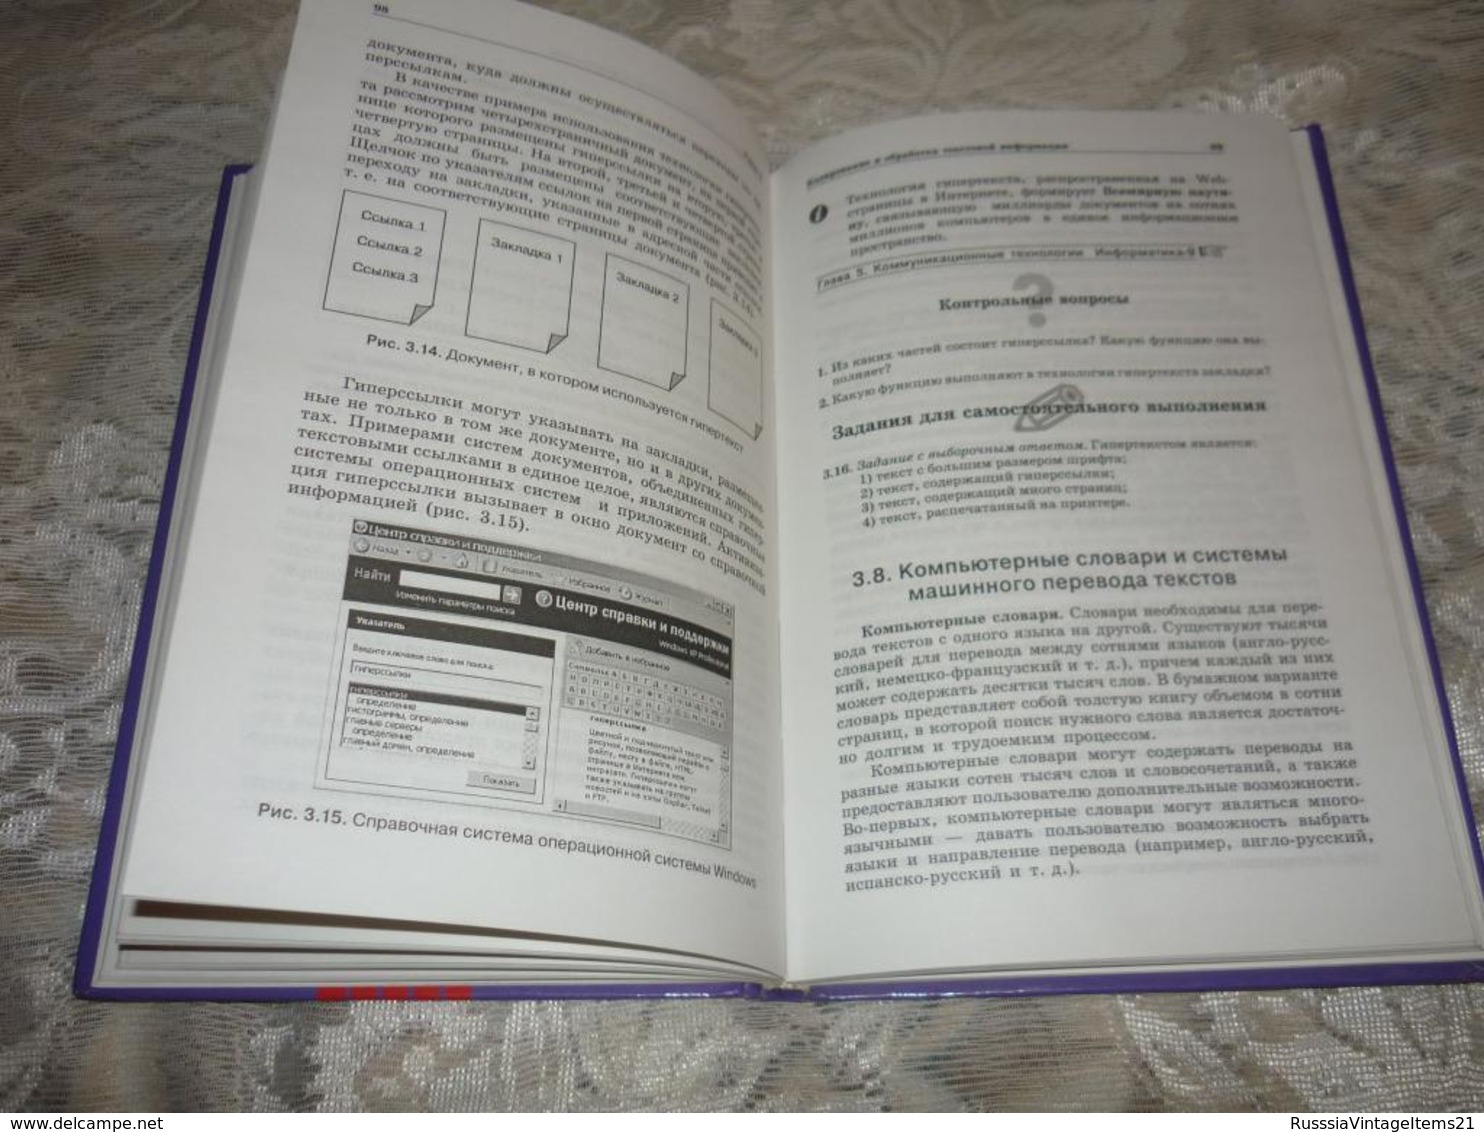 Russian Textbook - In Russian - Textbook From Russia - Ugrinovich N. Informatics And ICT. Basic Course. 8th Grade - Langues Slaves